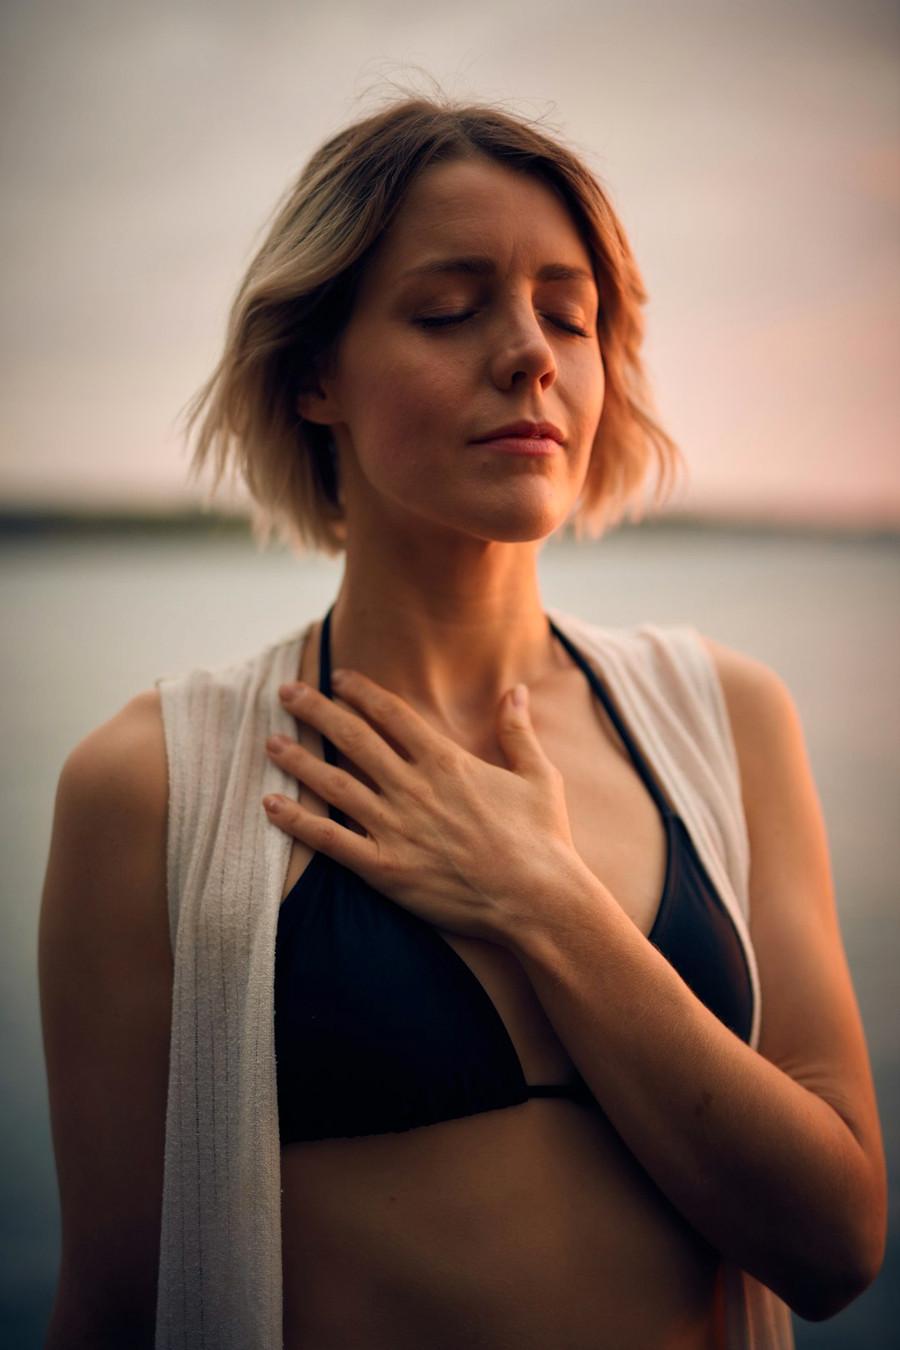 How To Do Deep Breathing Exercises